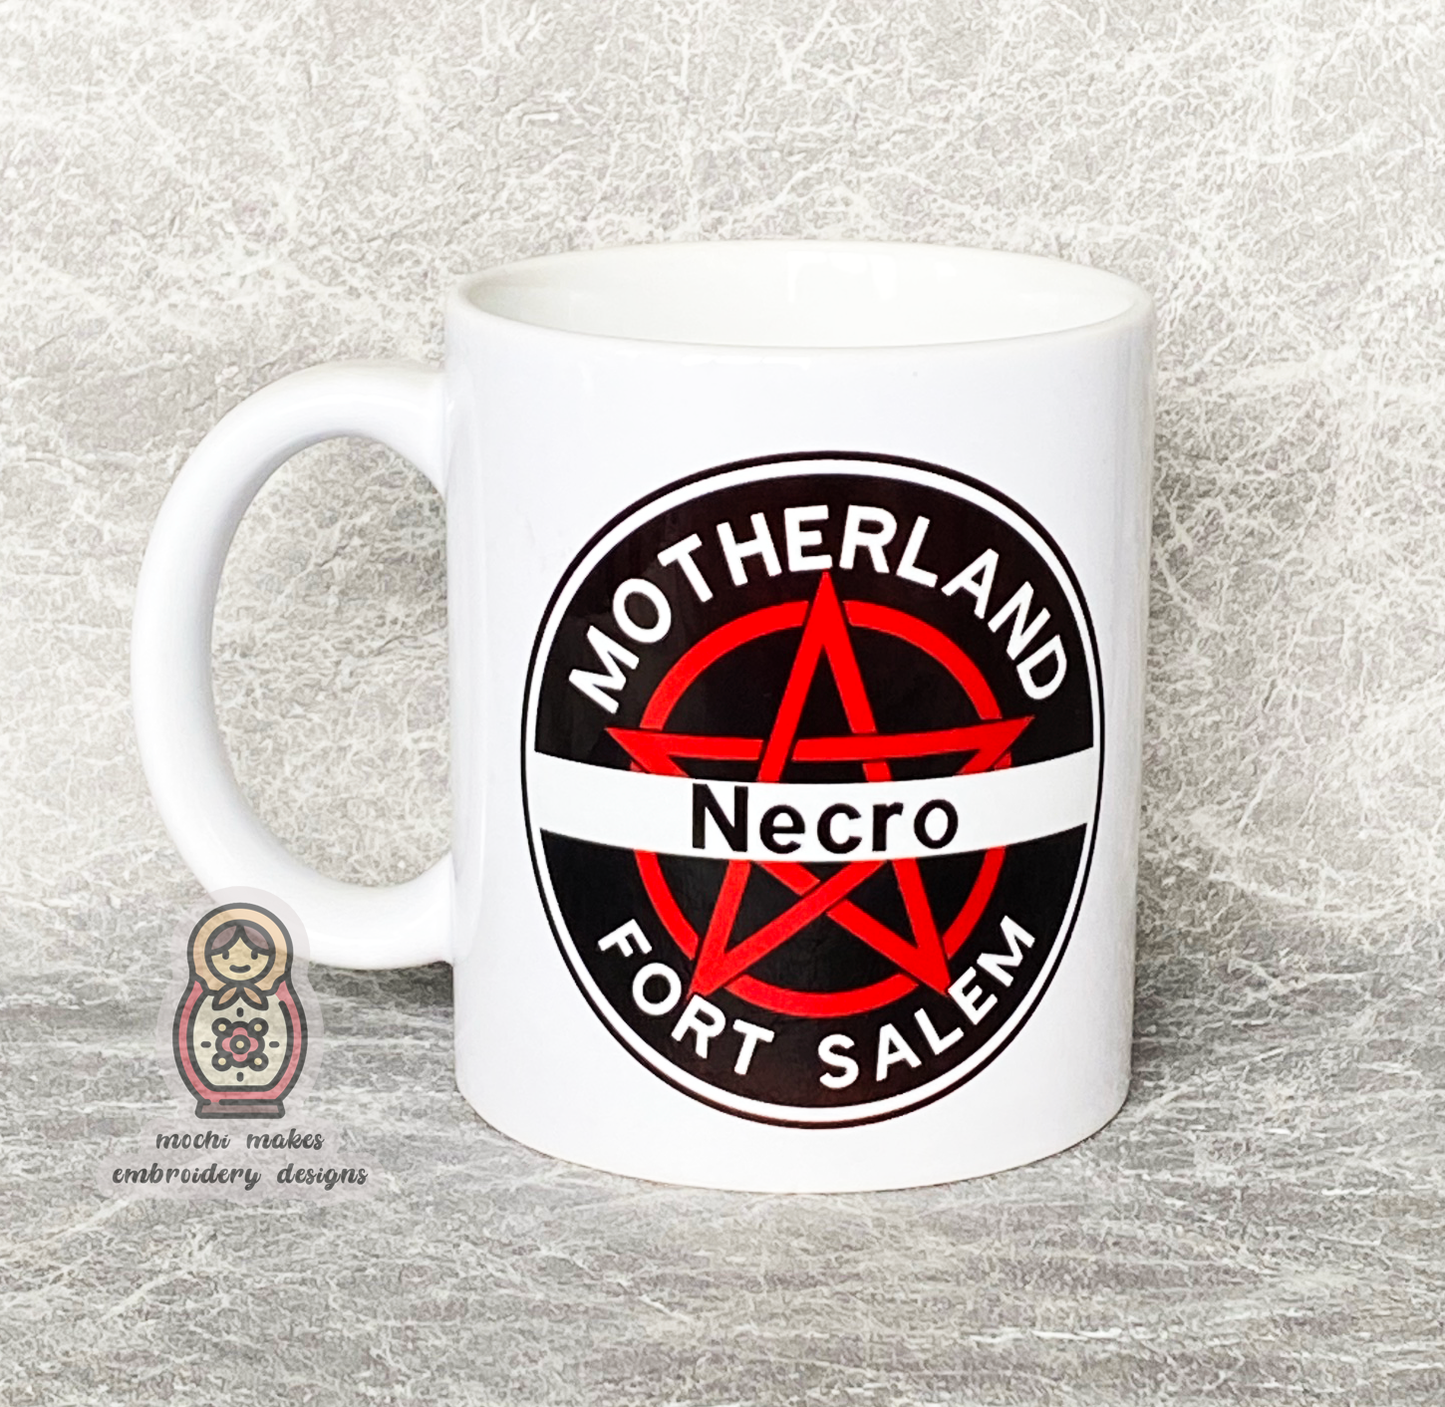 Motherland Fort Salem Witch Military Coven Mug 11oz Gift Bellweather Unit - Necro Fixer Blaster Knower